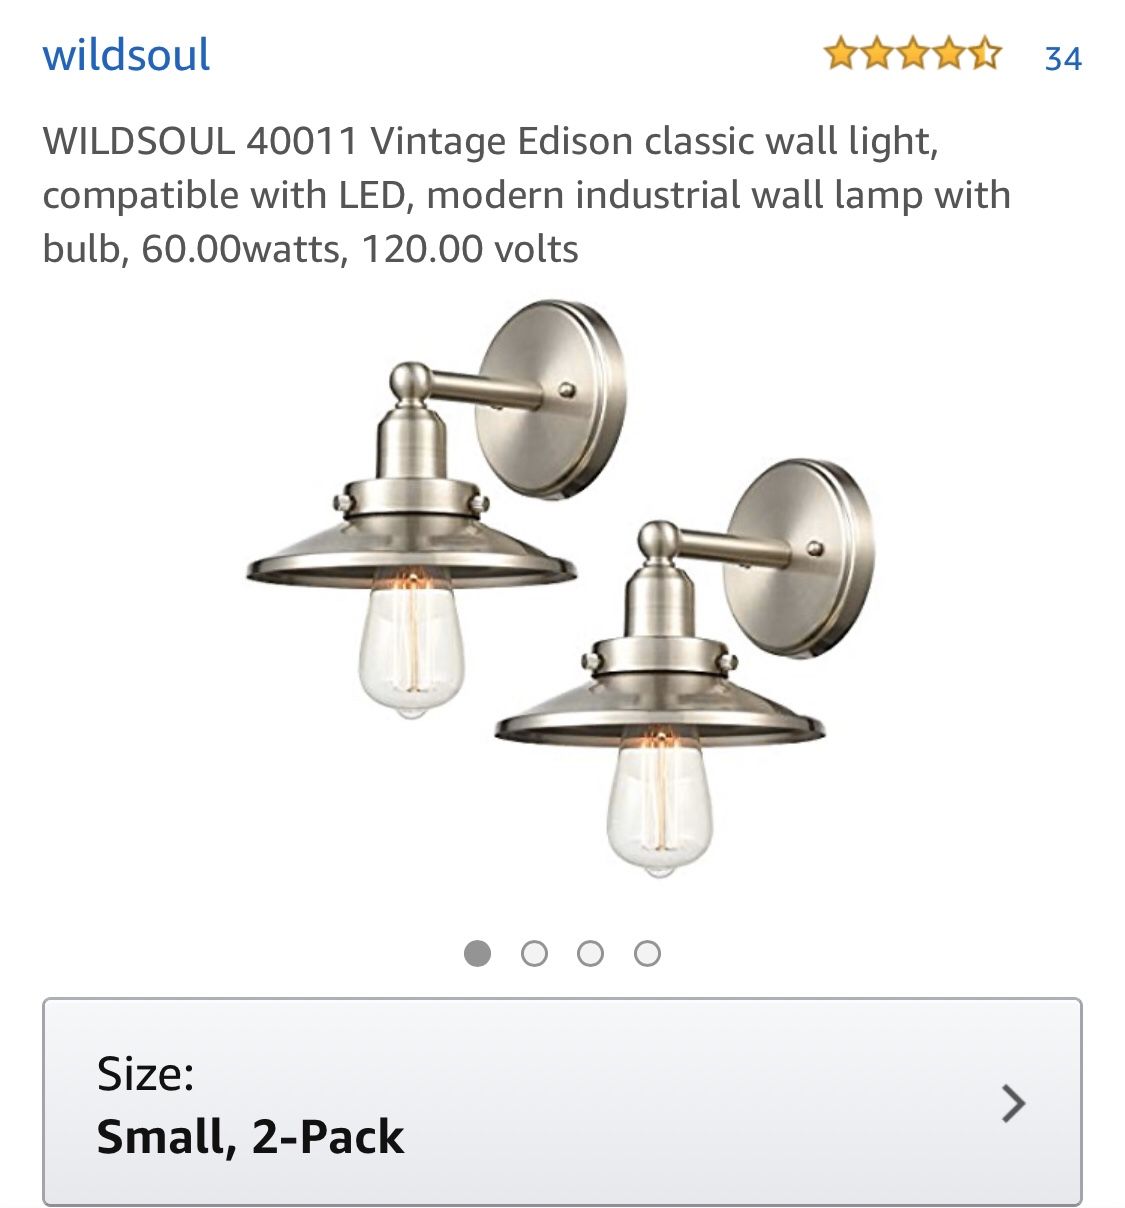 Modern industrial wall lamp with bulb 60w , wildsoul vintage Edison classic wall light, compatible with LED brand new in the box